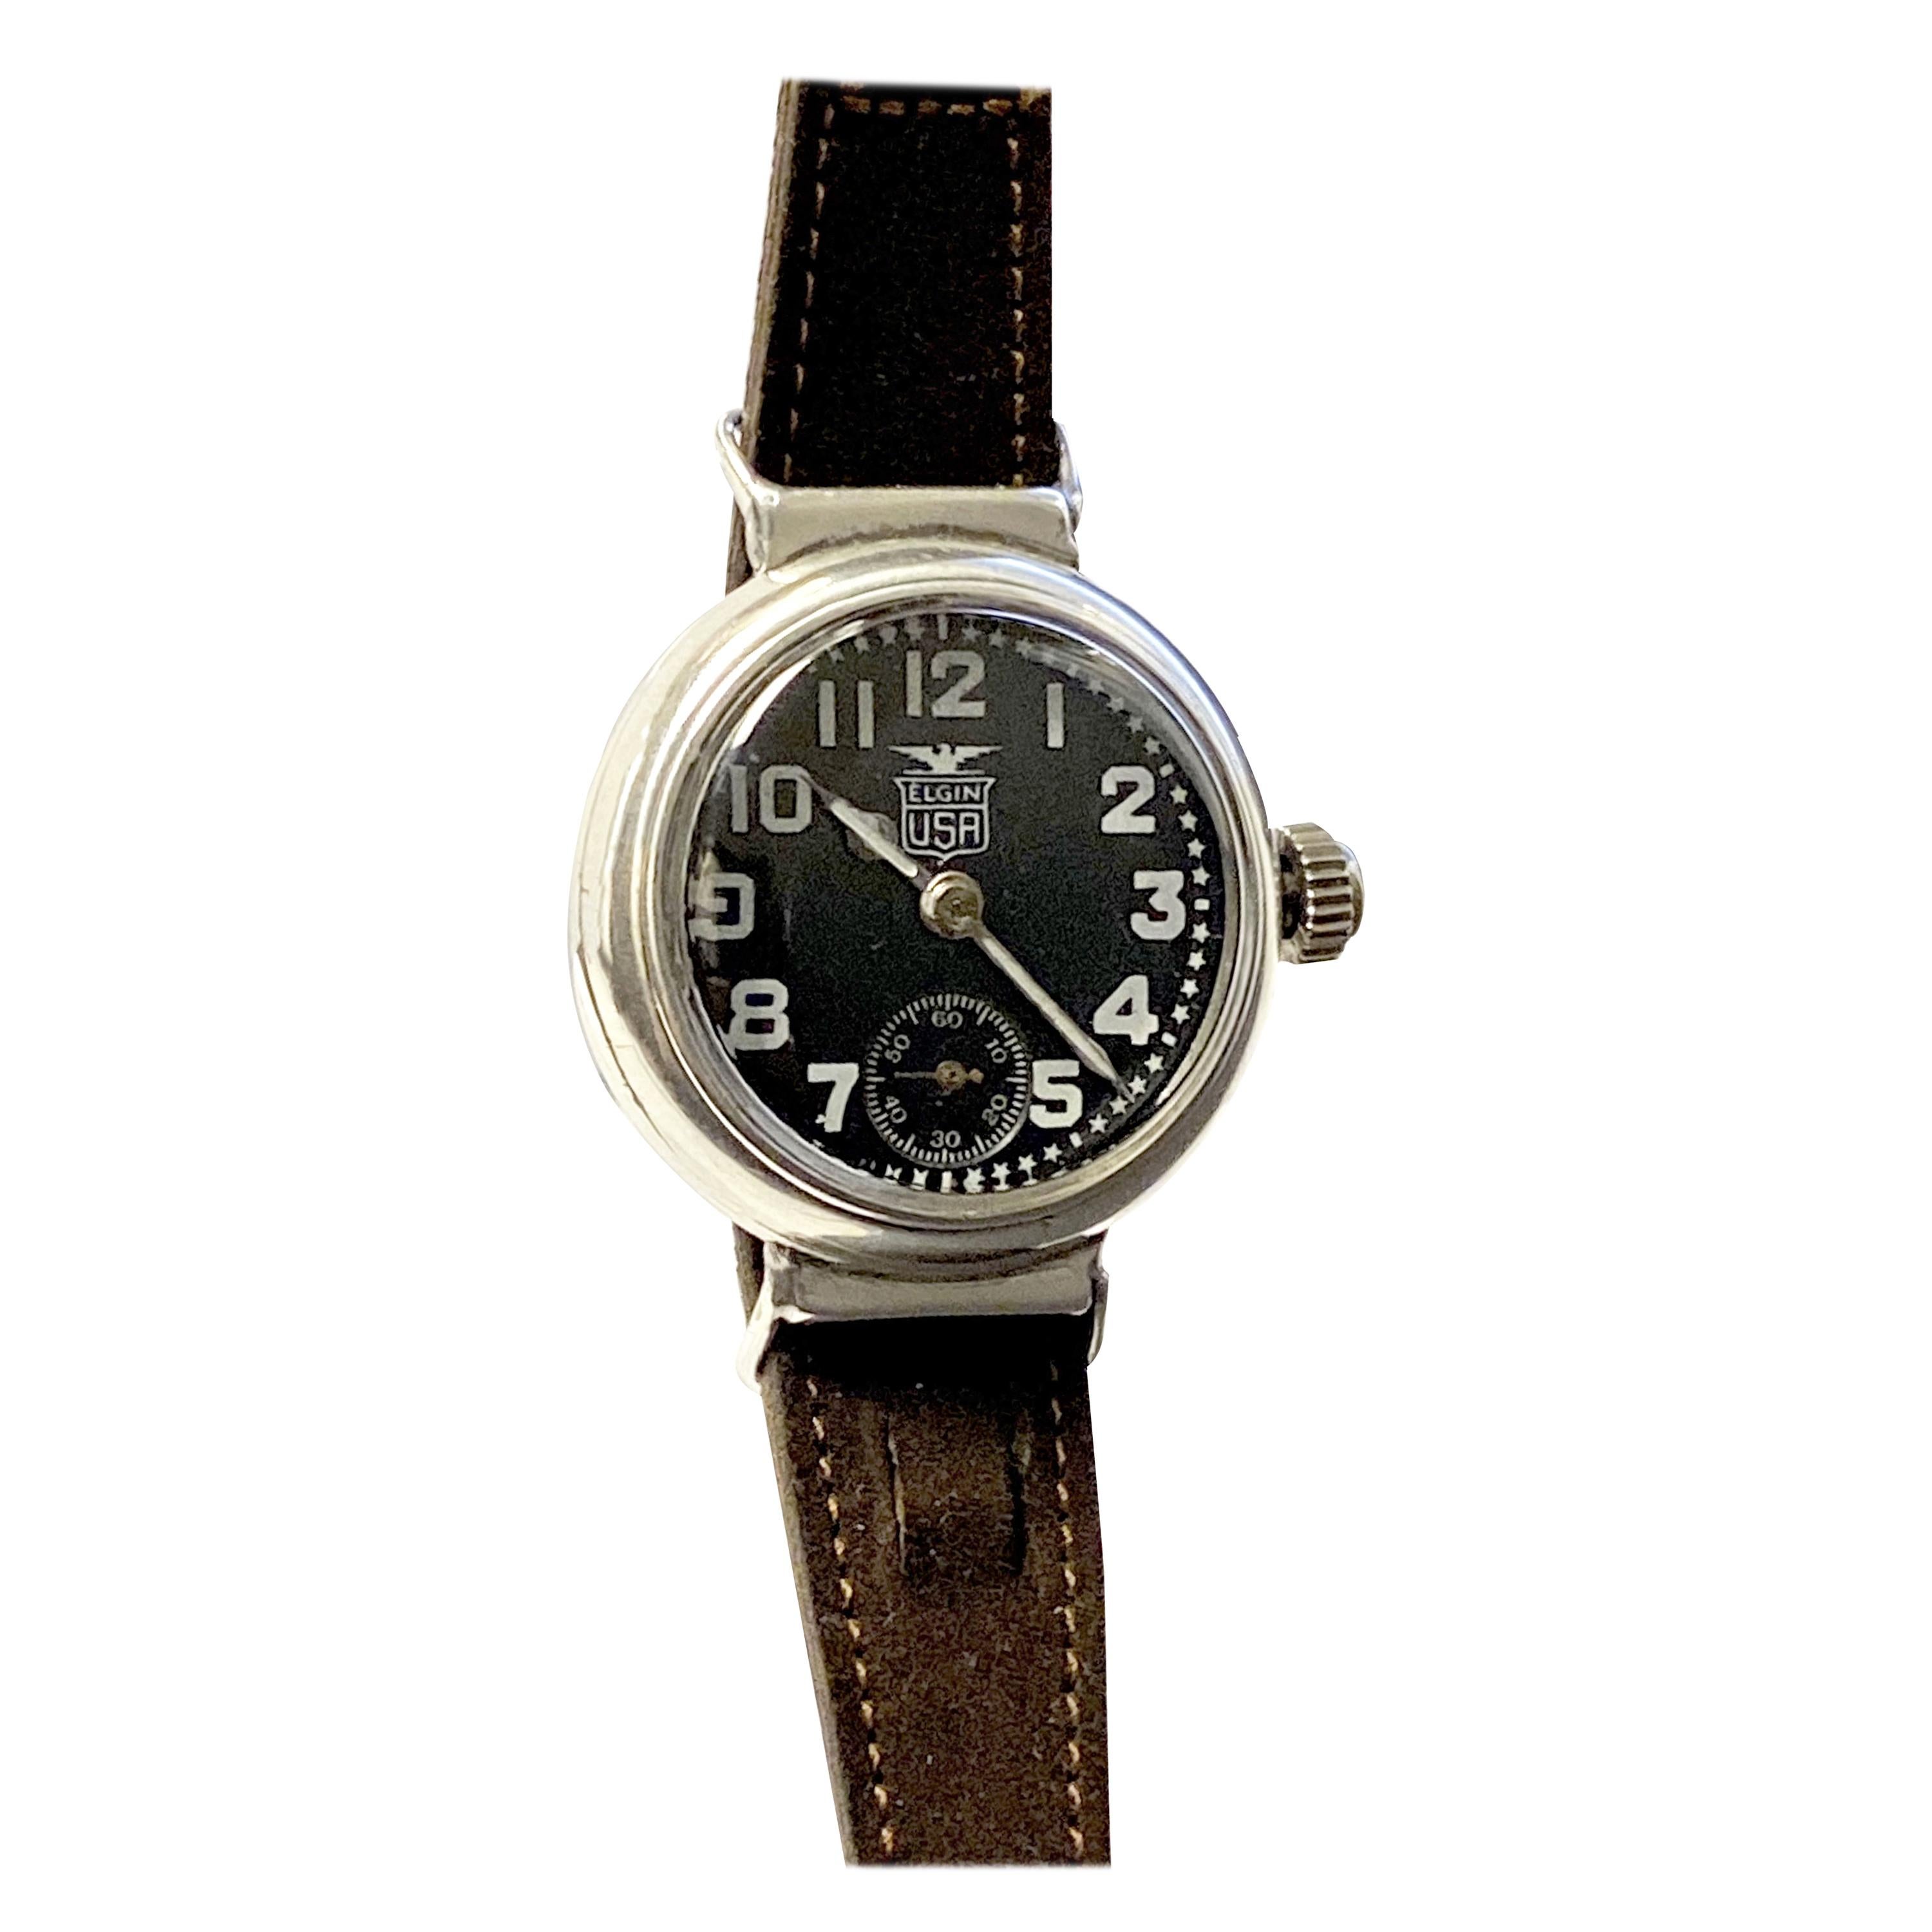 Elgin General Pershing 1919 Sterling Silver Cased Trench Style Wristwatch